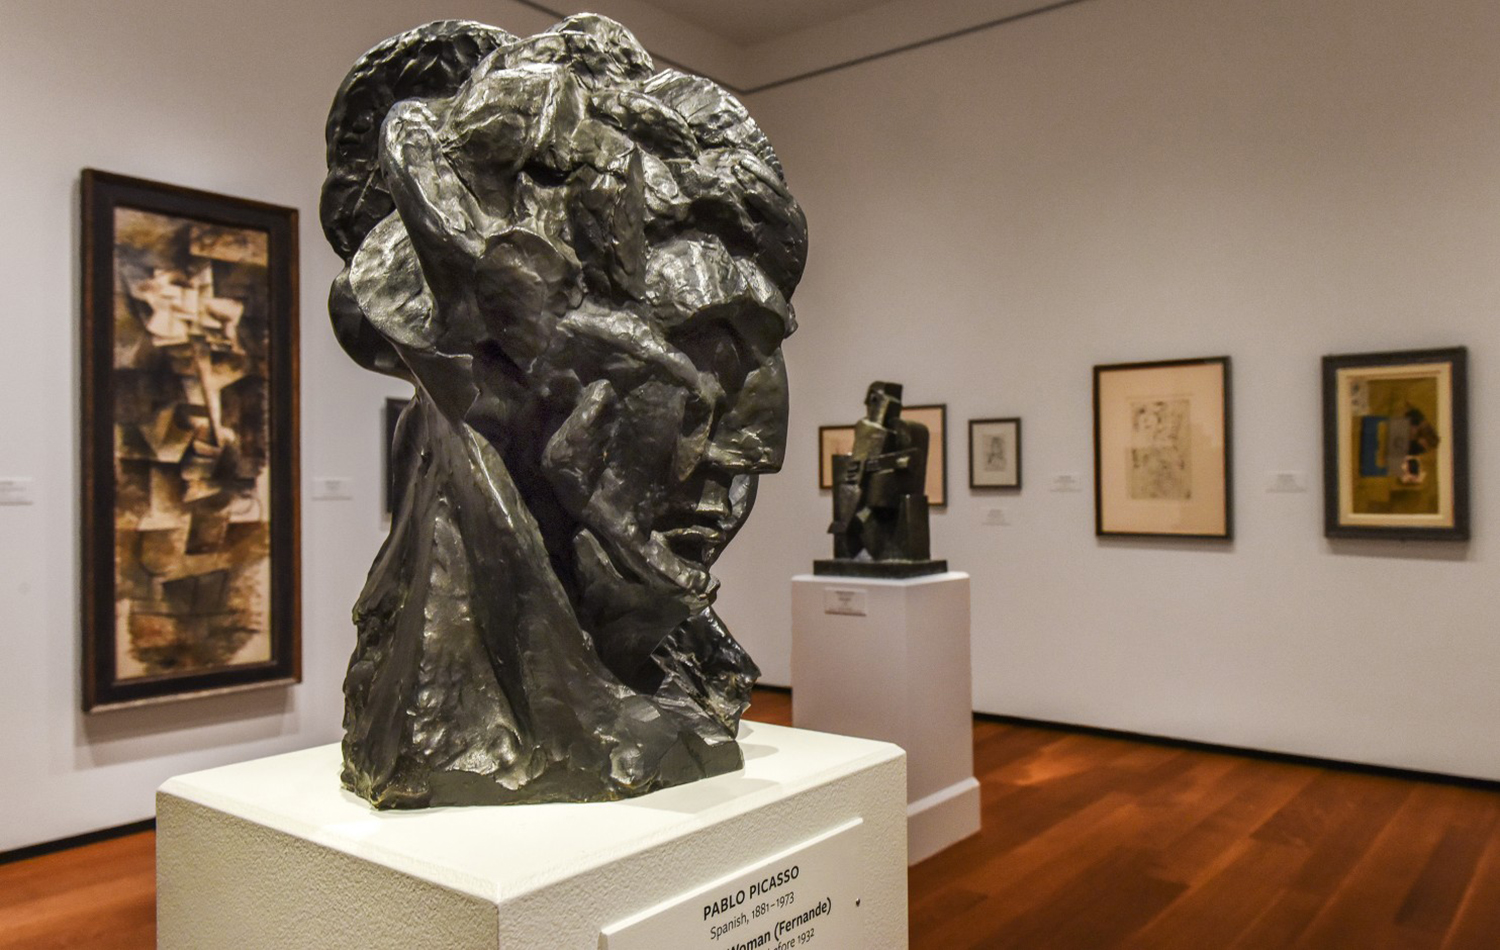  Pablo Picasso's "Head of a Woman." (Bill O'Leary/The Washington Post) 